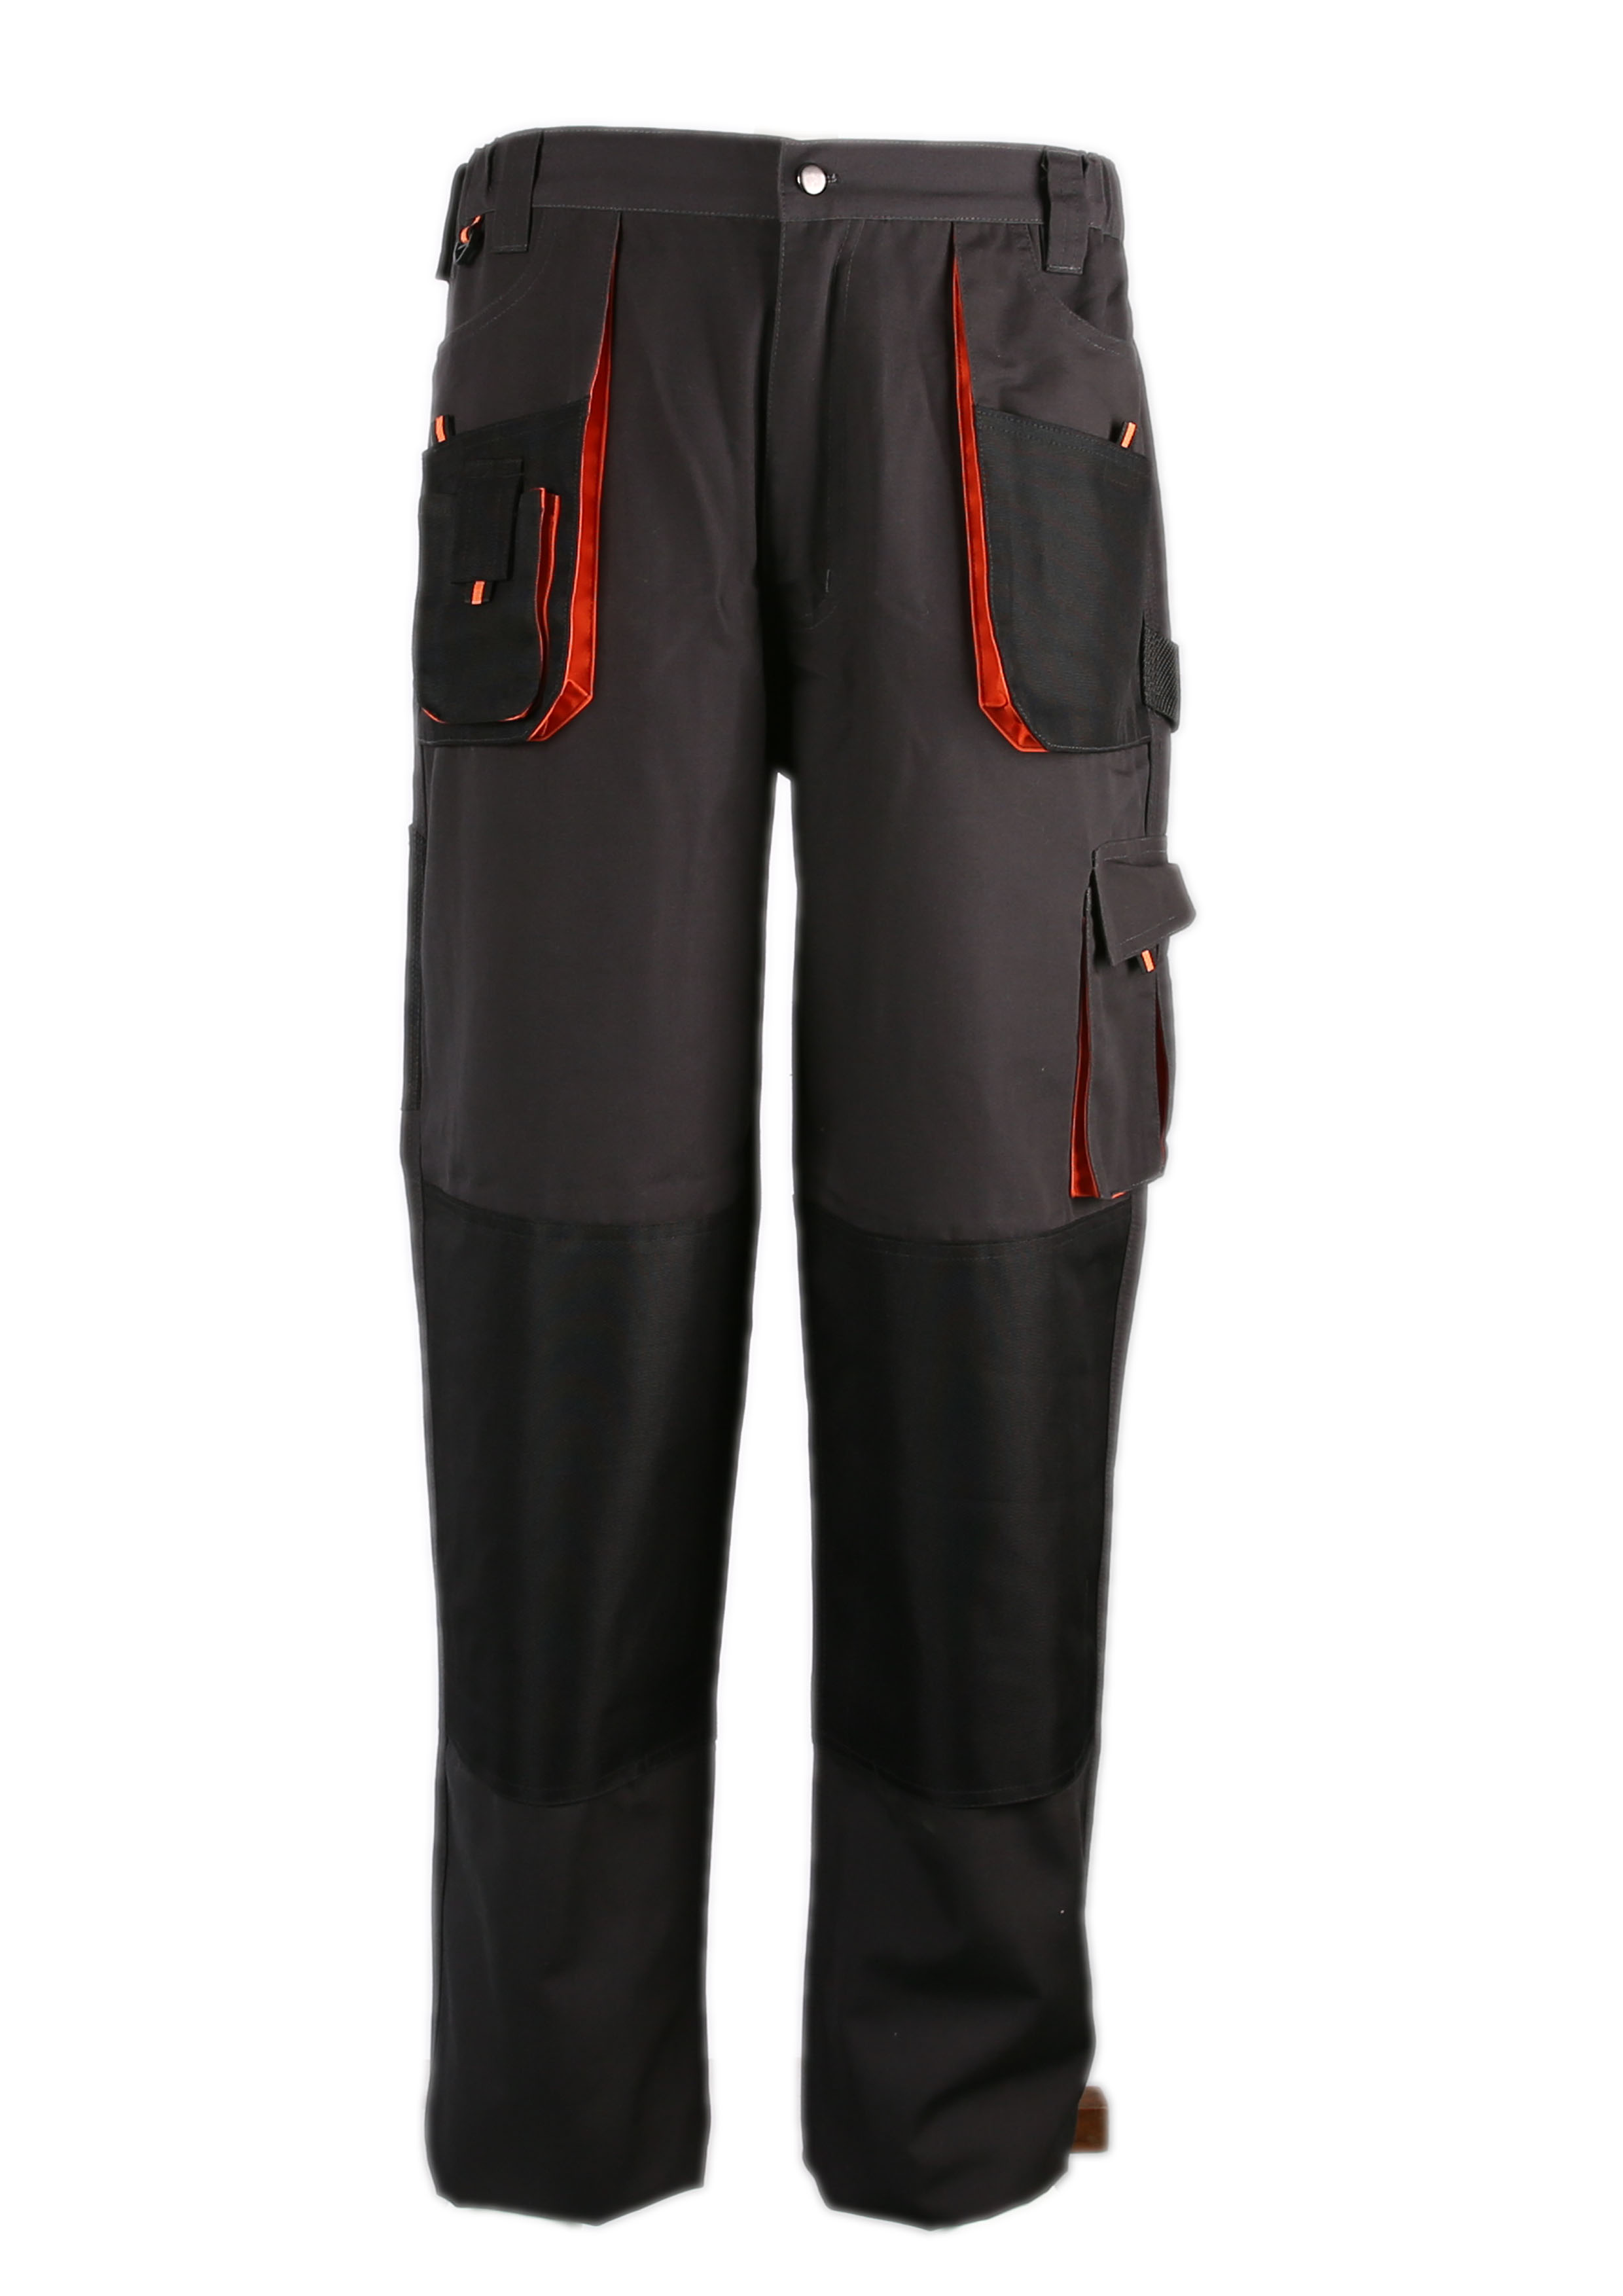 Durable T/C Mens Caro Work Pants with Knee Pad Pockets